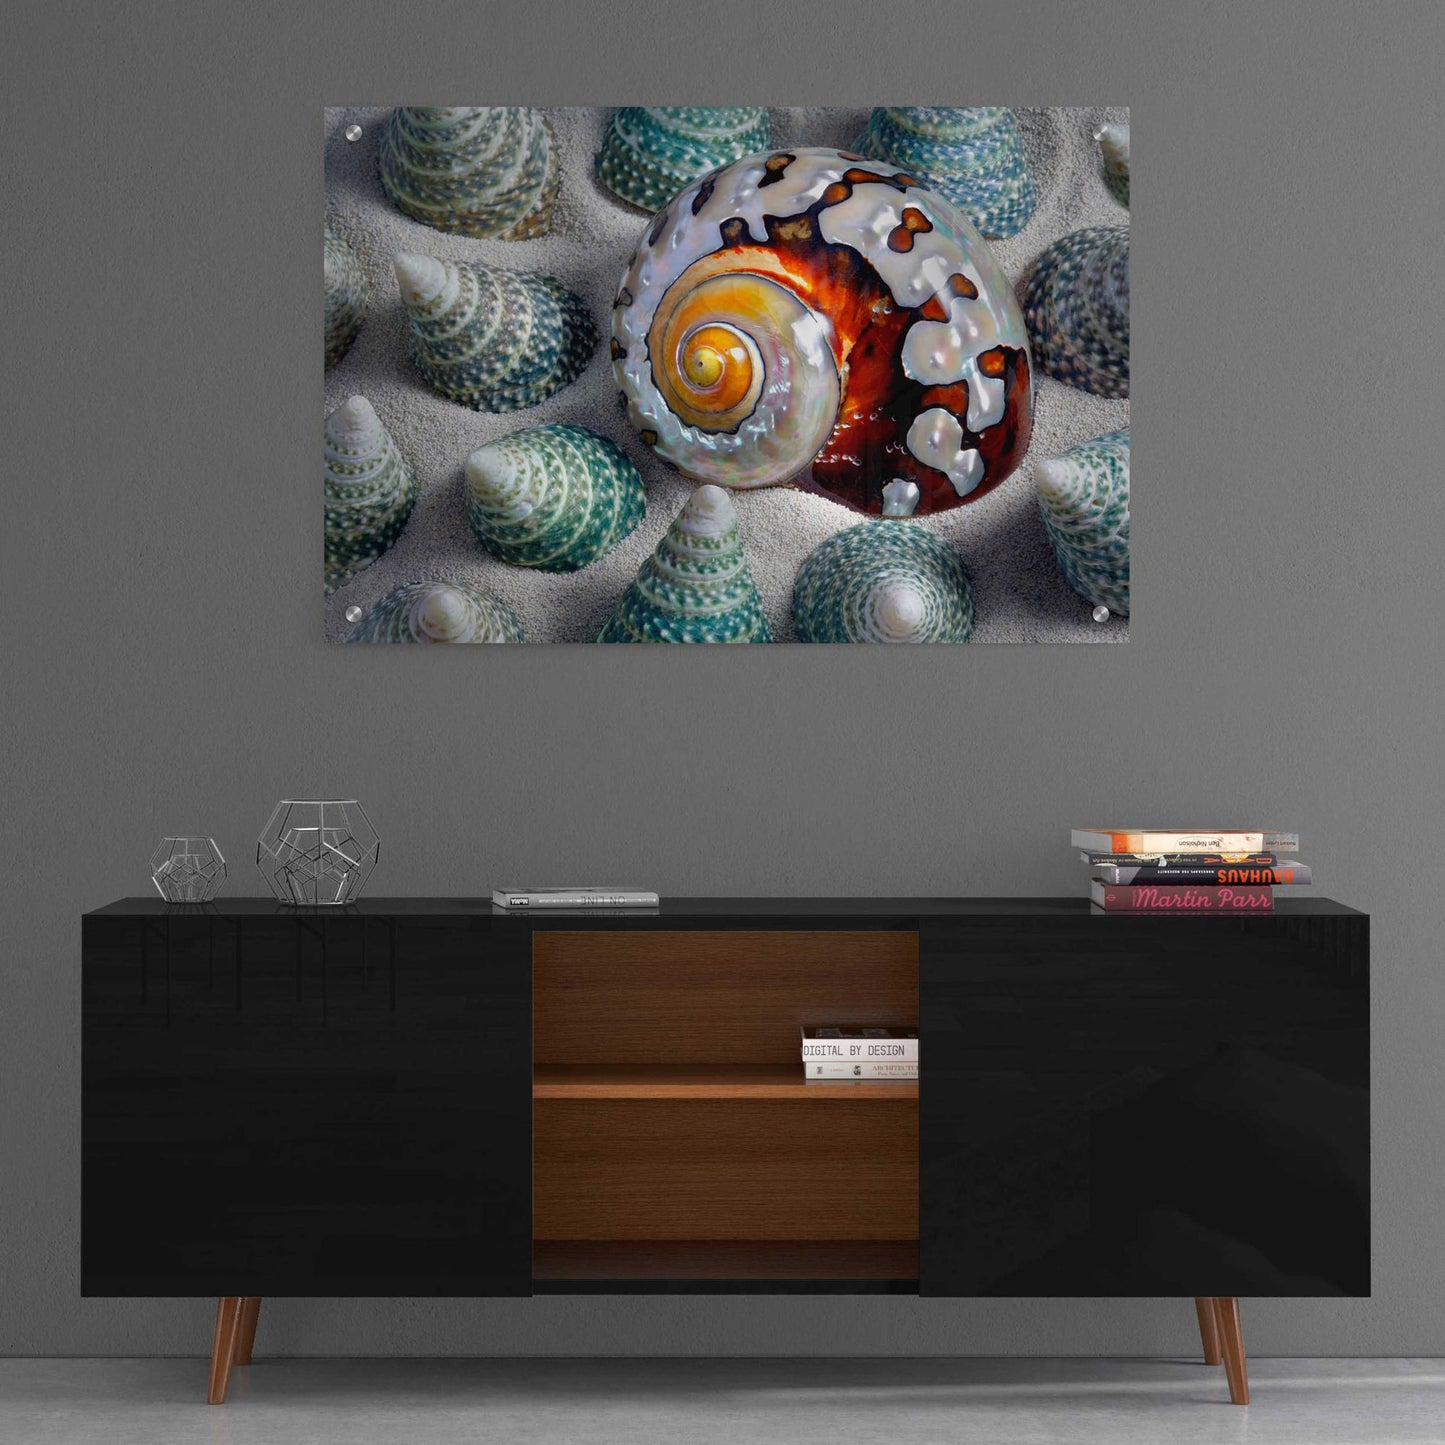 Epic Art 'Shell Spiral' by Dennis Frates, Acrylic Glass Wall Art,36x24